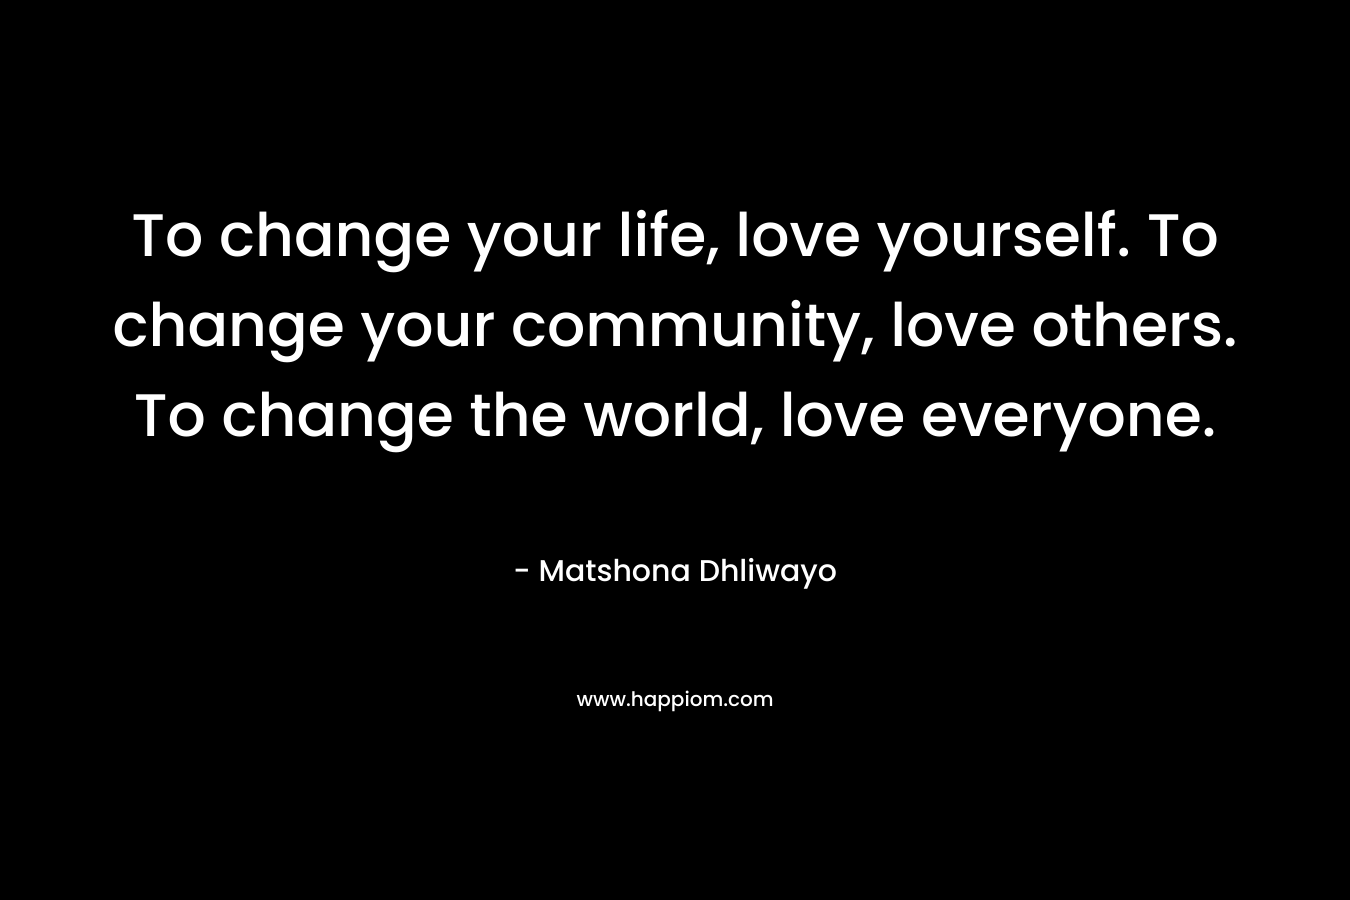 To change your life, love yourself. To change your community, love others. To change the world, love everyone.